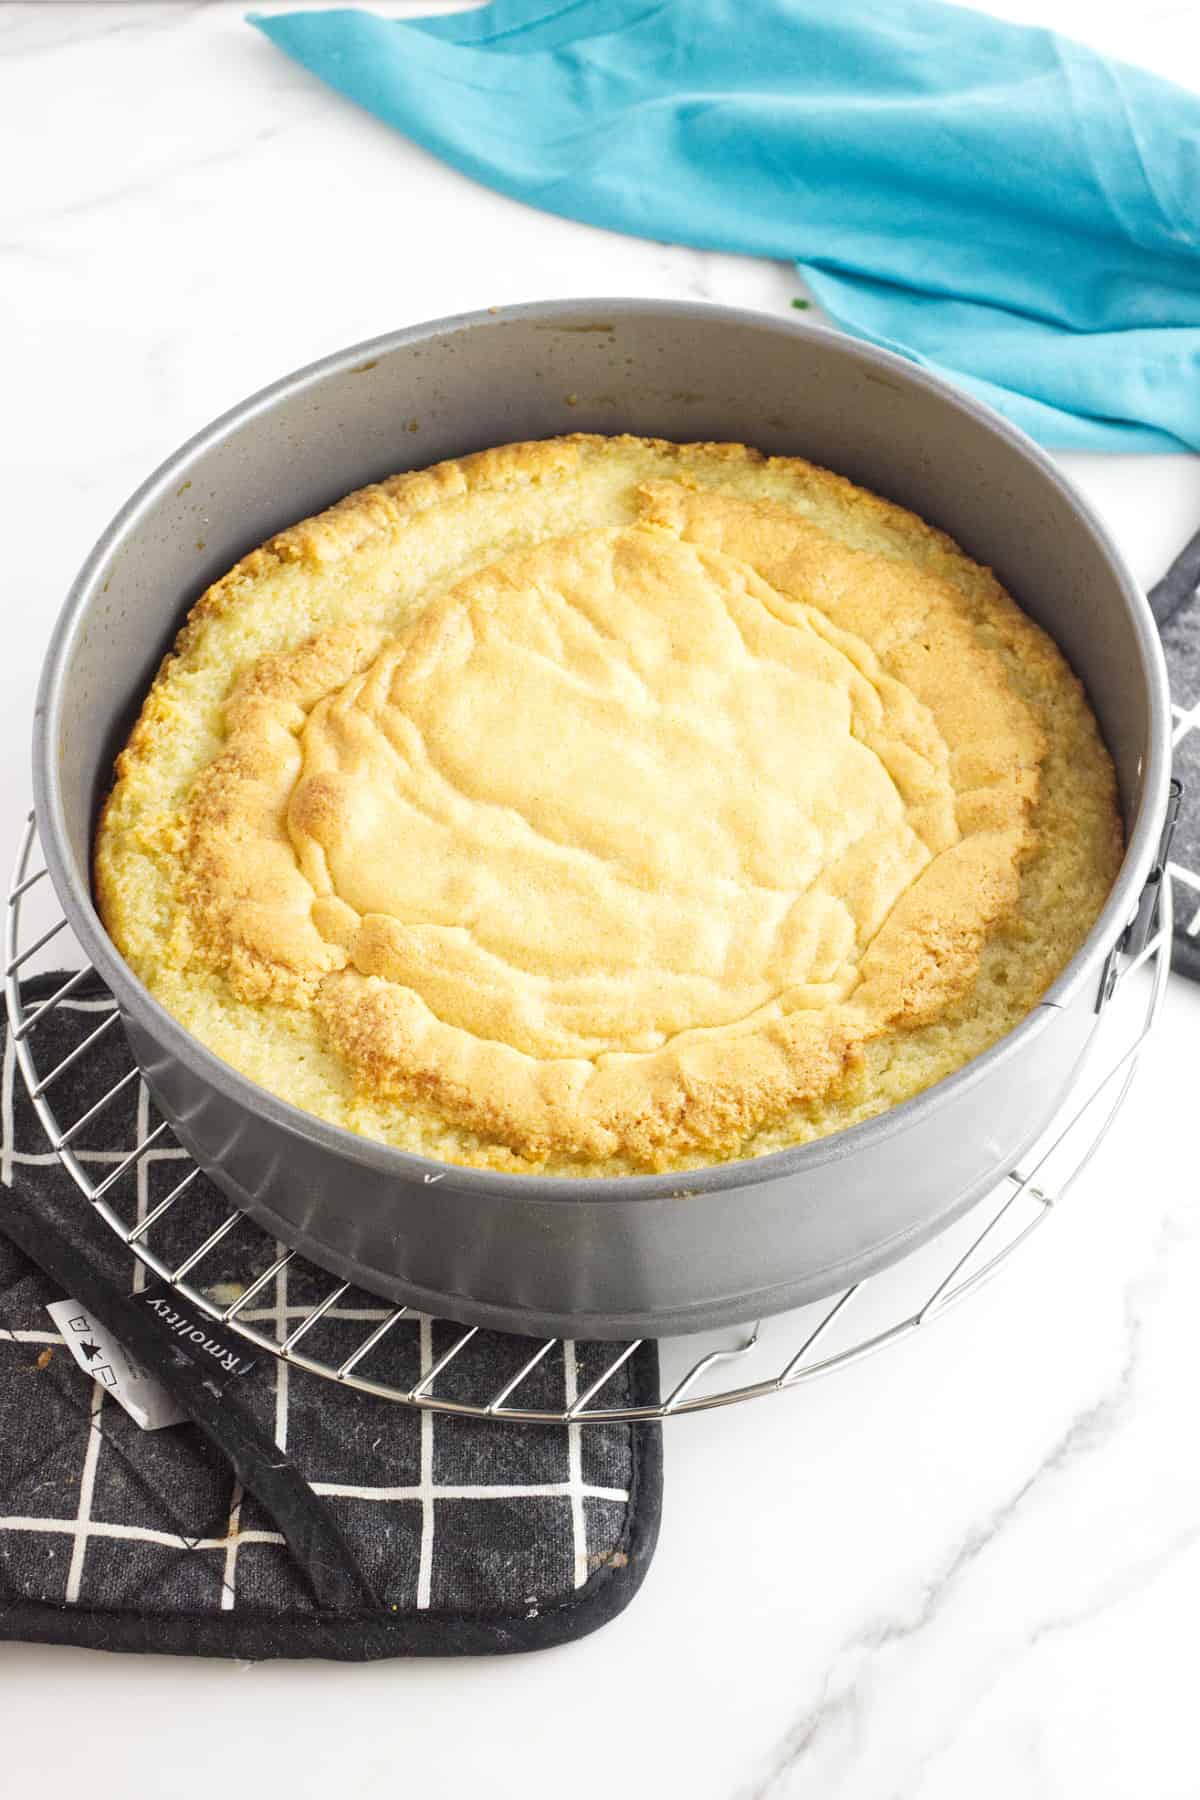 baked cake in a pan cooling on a rack.